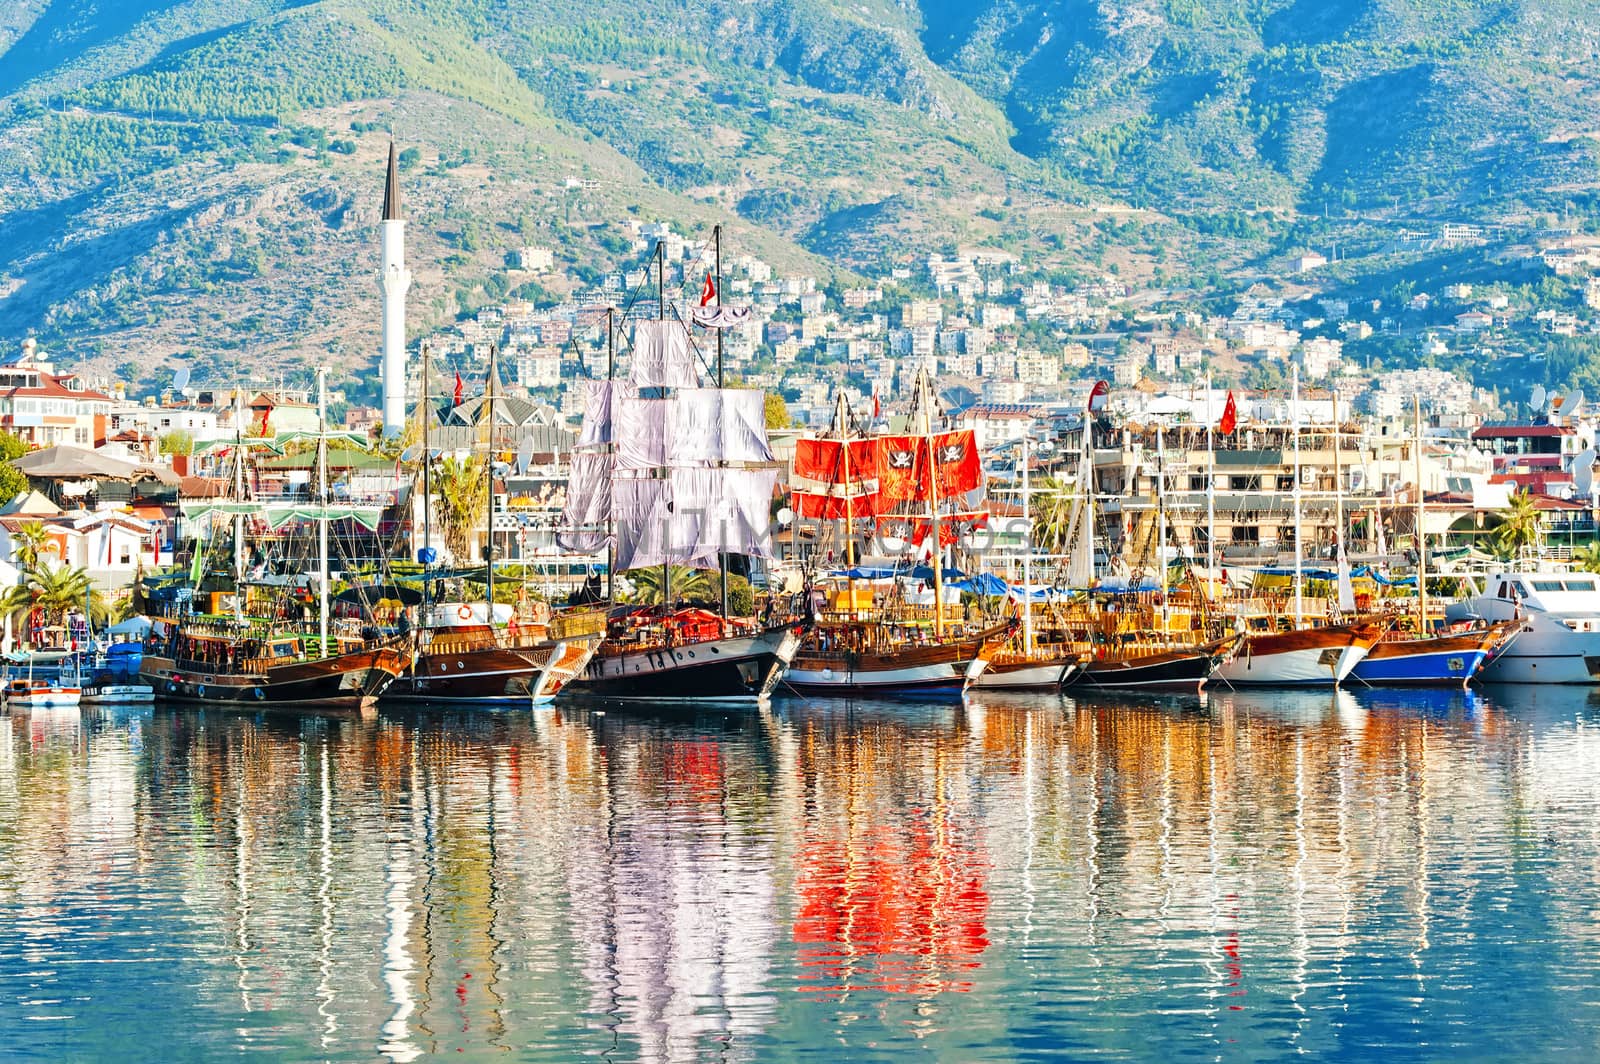 Dinghies on the waterfront of the city of Alanya.